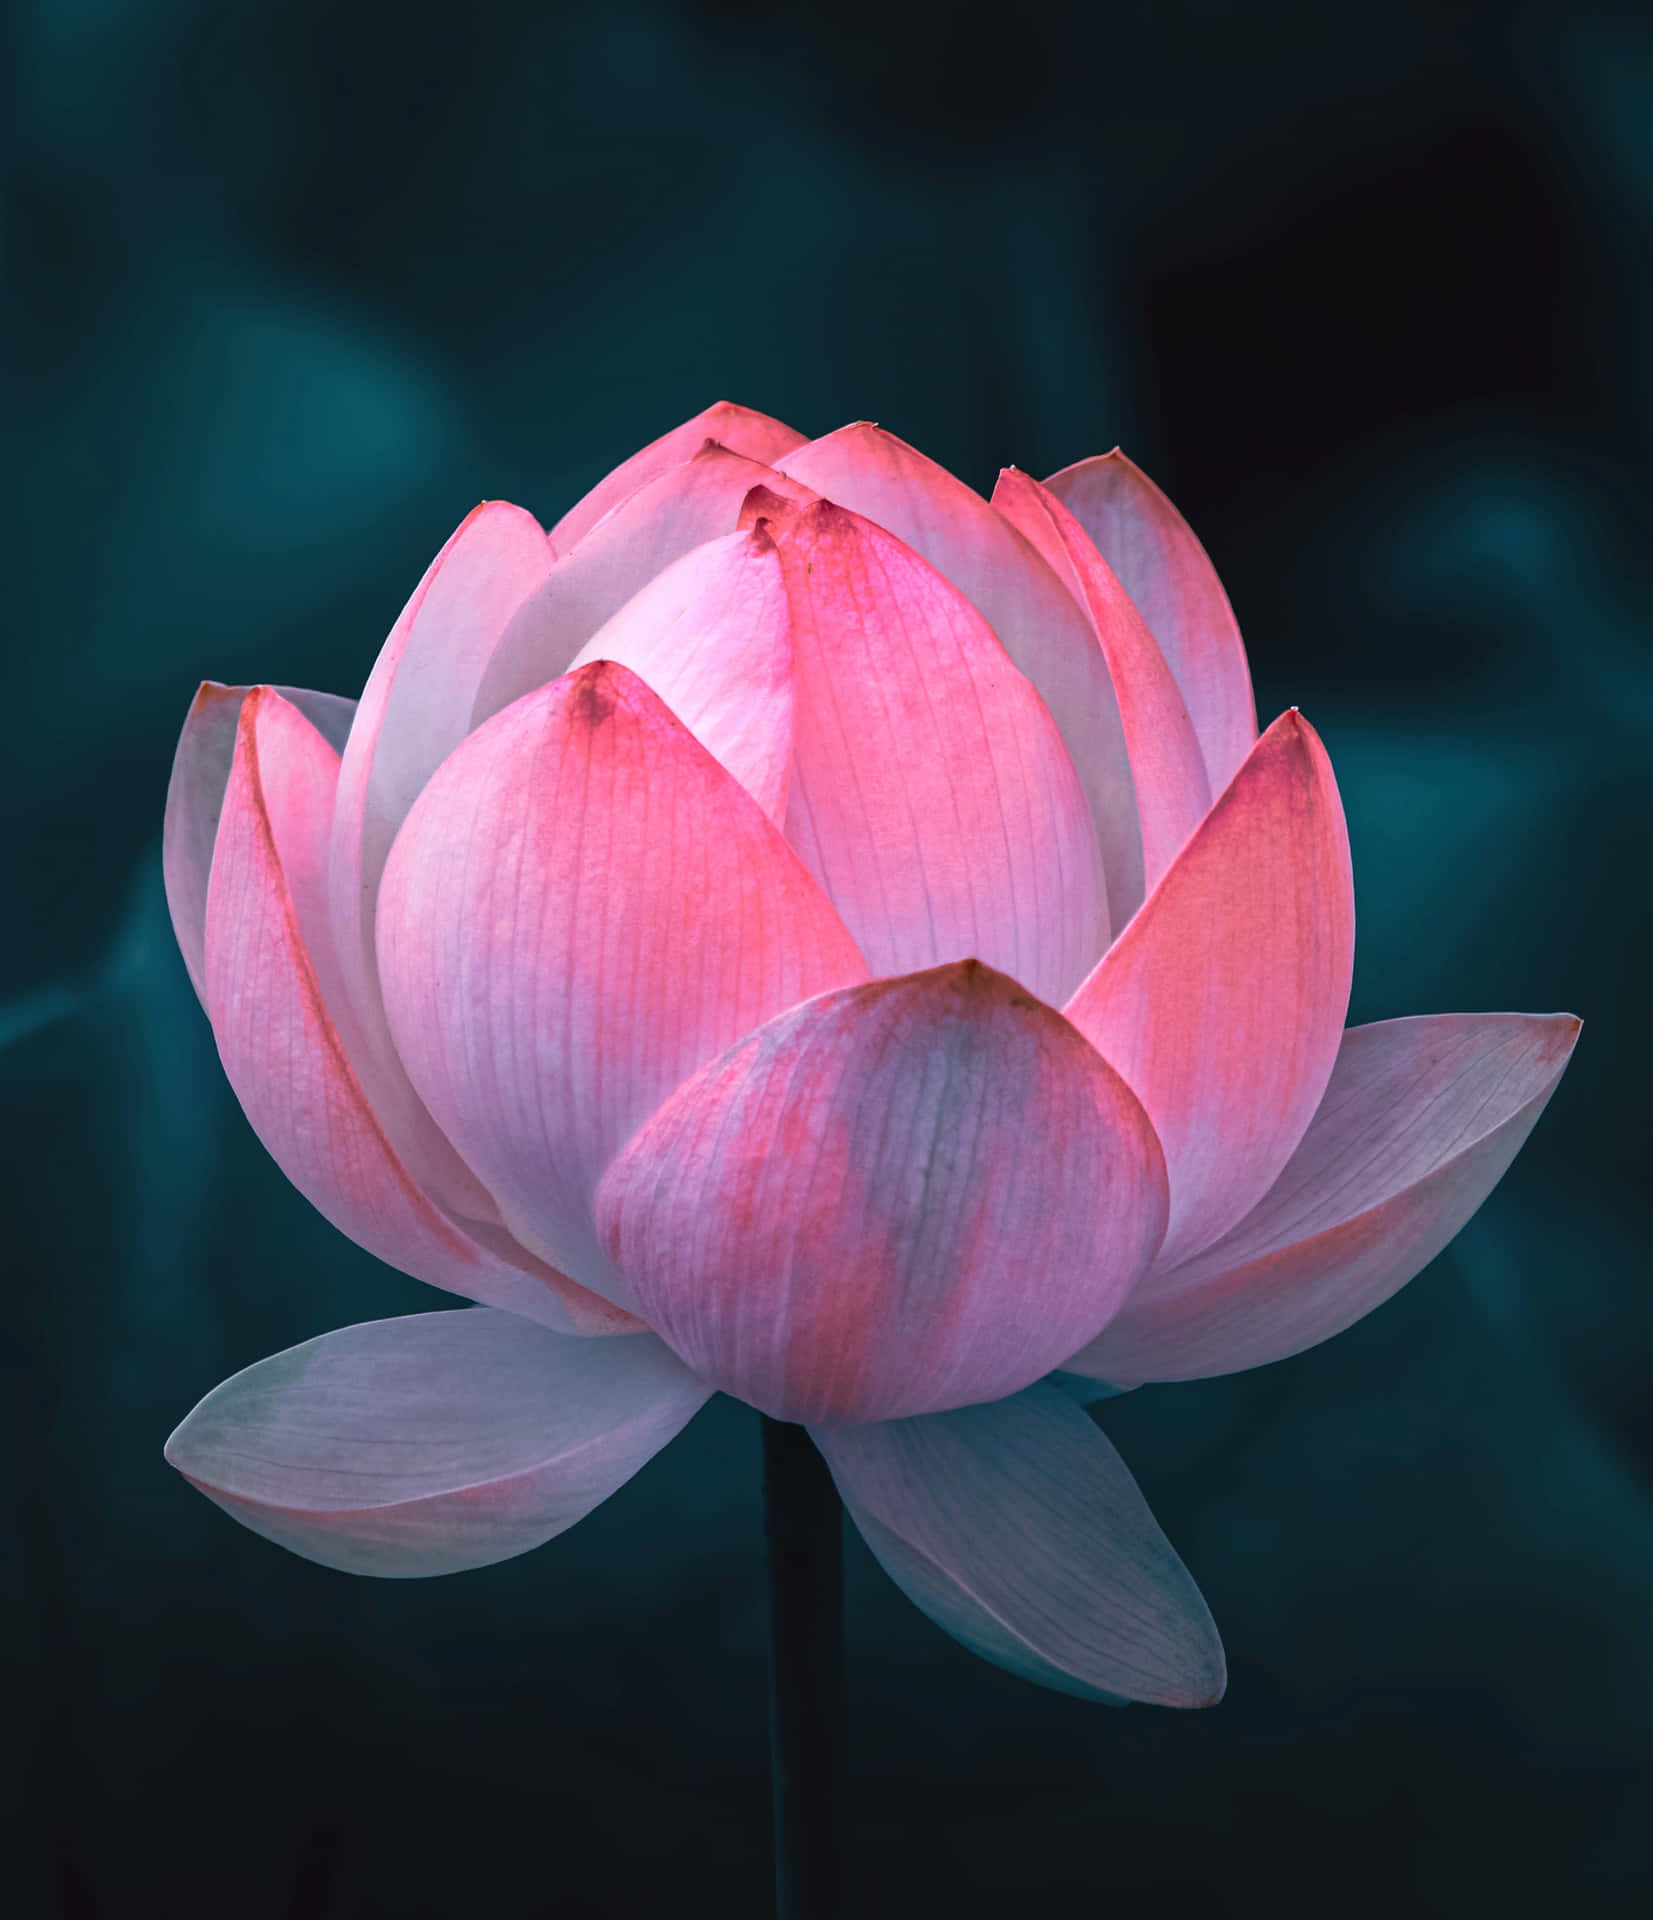 A beautiful lotus flower atop a tranquil pond